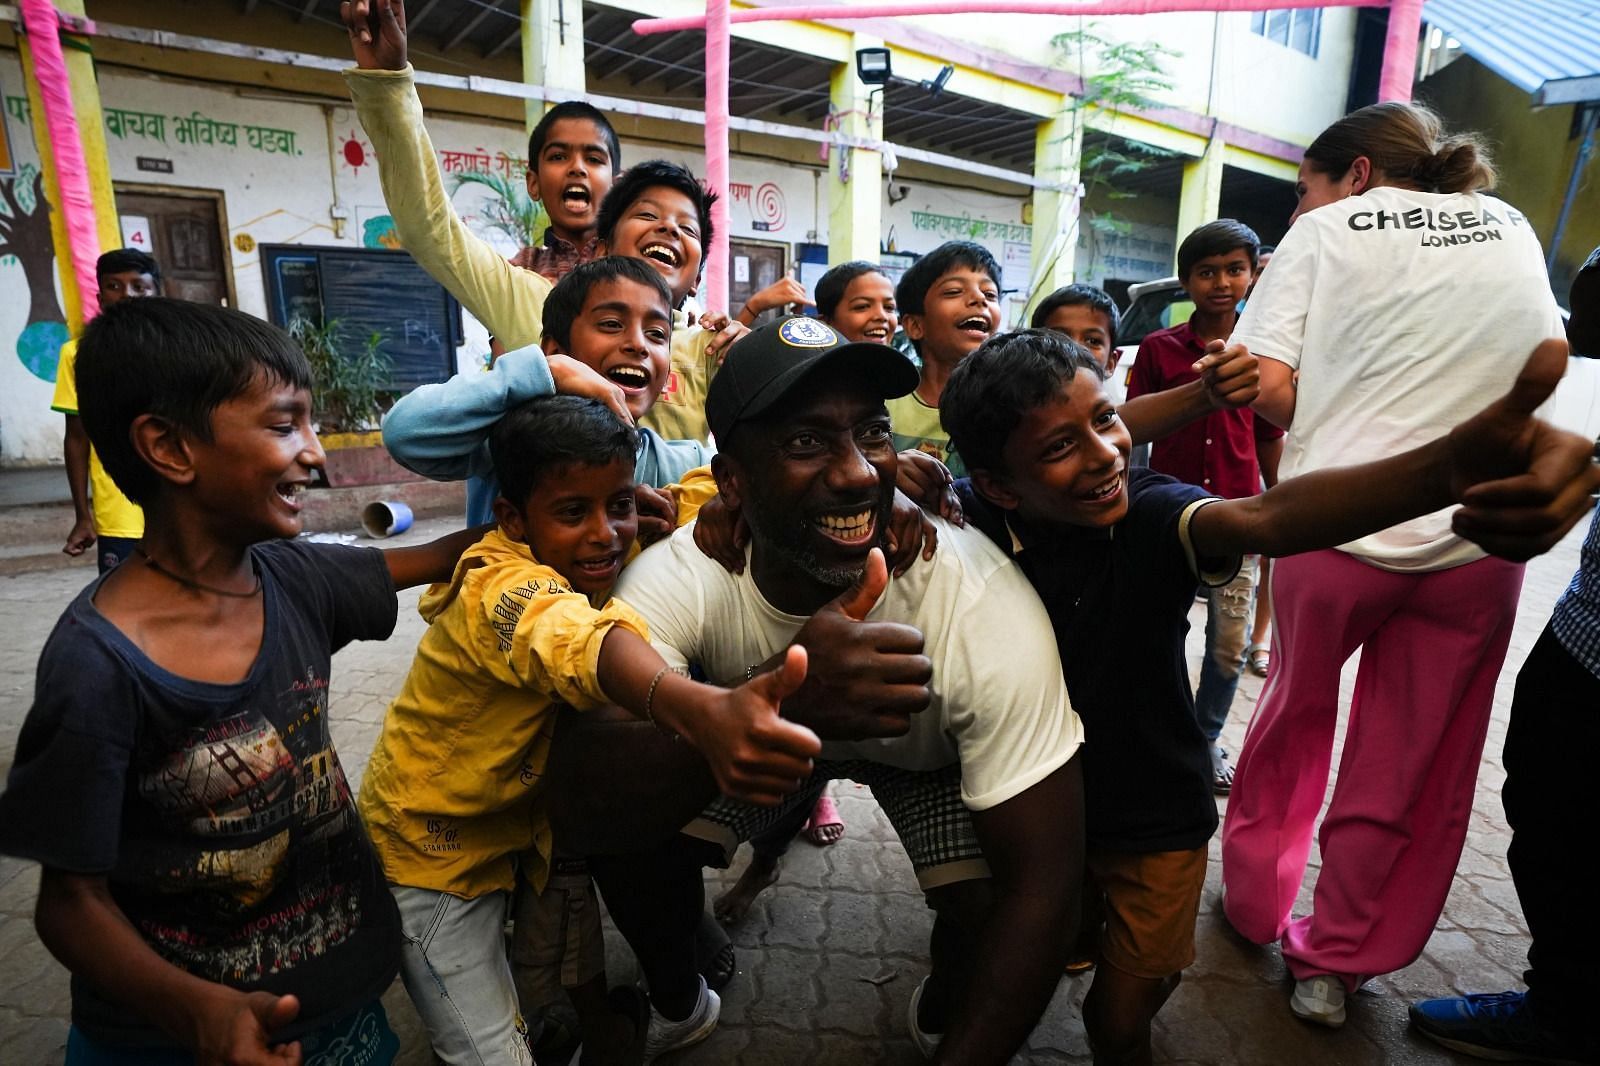 Jimmy Floyd Hasselbaink posing for a picture during his visit to Dharavi for the coaching clinic (Image via Business of Sports/SportsKeeda)